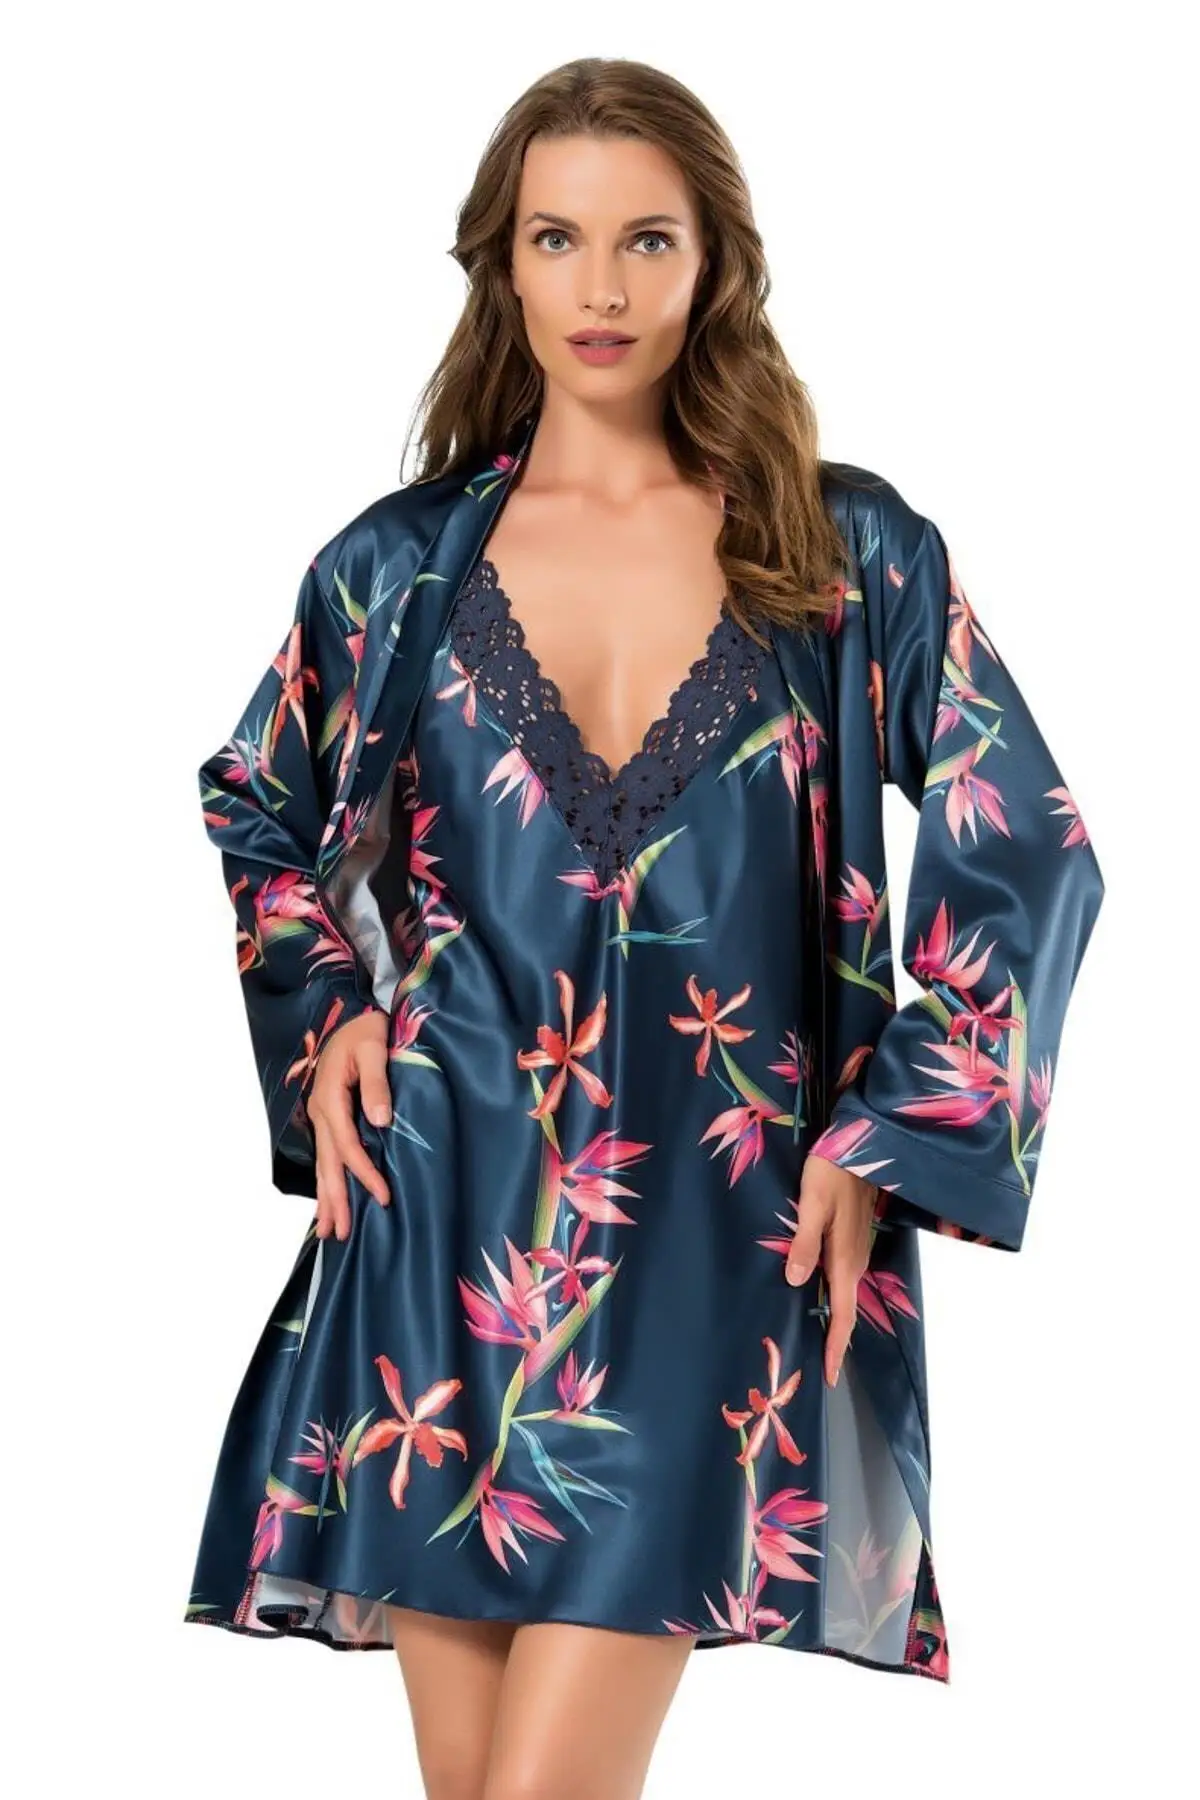 

Women Nightgown Dressing Gown Suit Pattern Satin Rope Strap Briefs Underwear Soft At Home Comfortable Can Be Worn In Bed sexy War